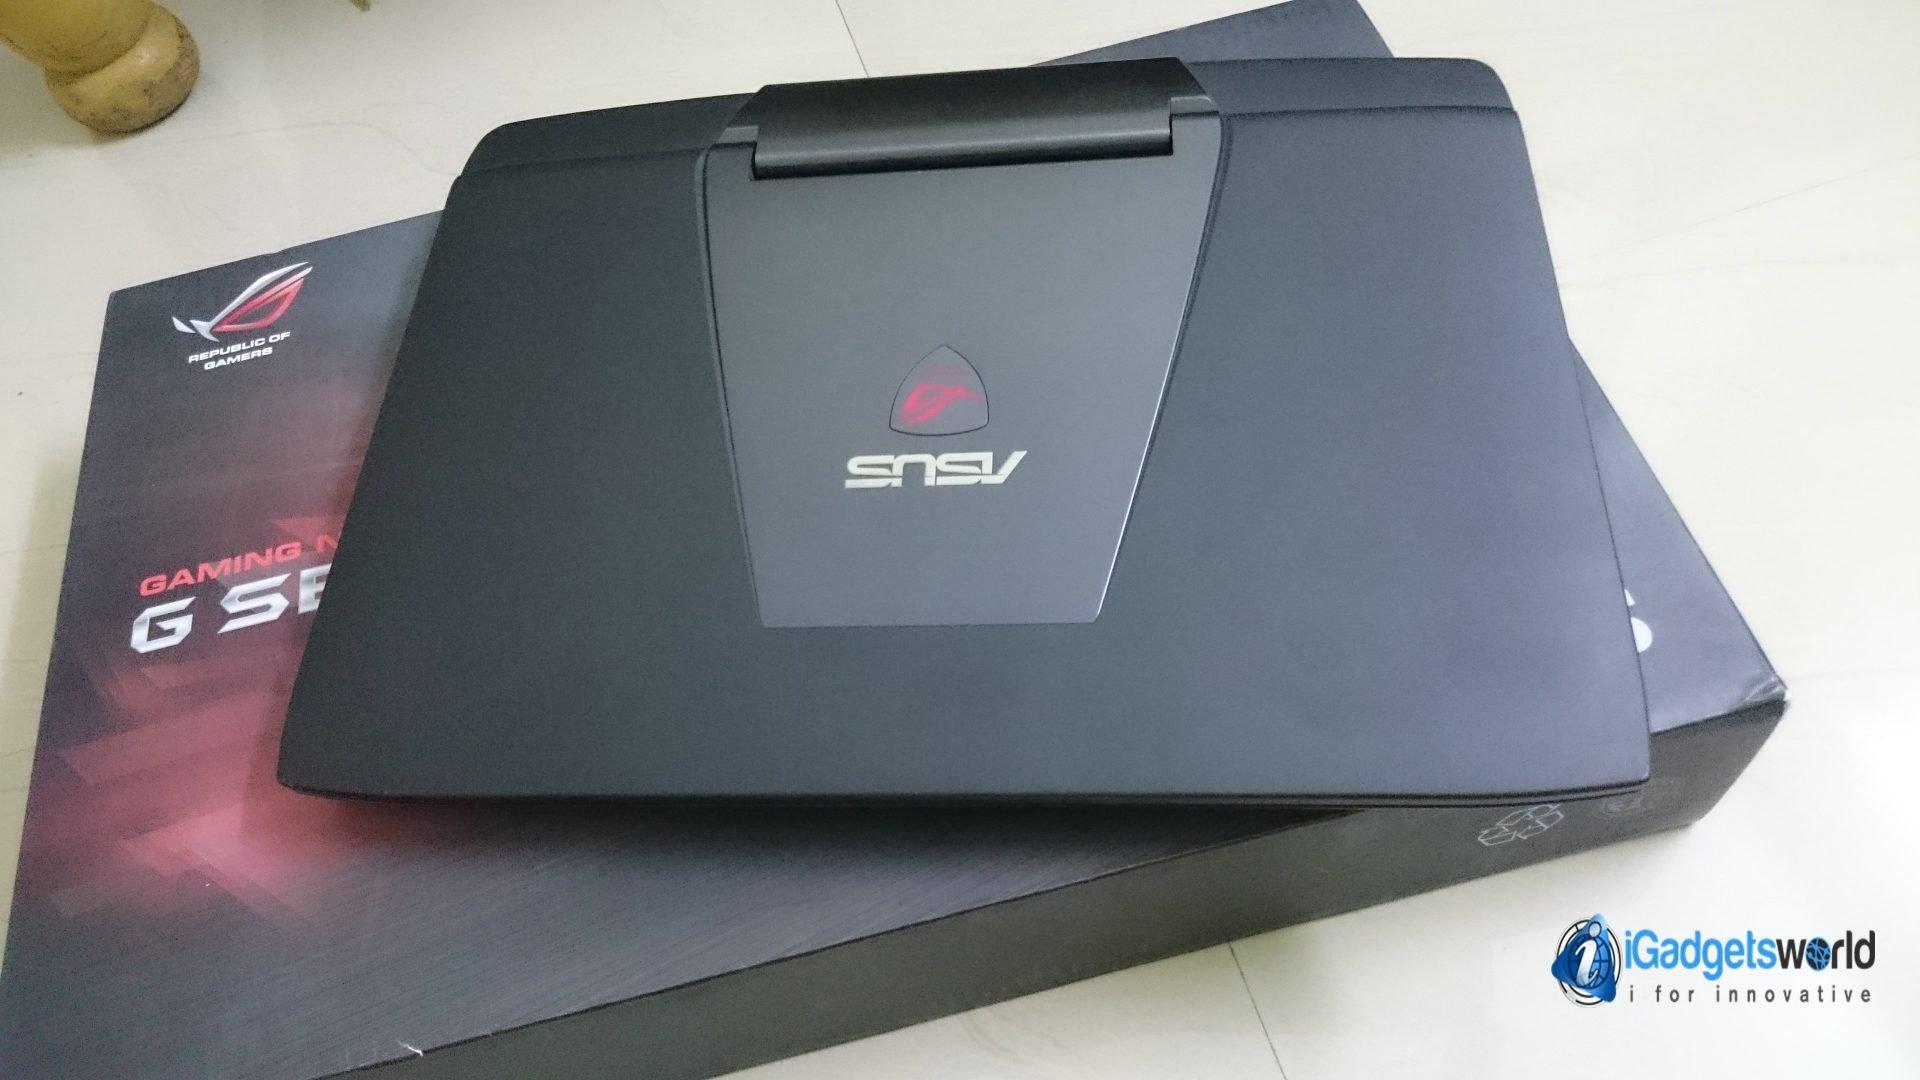 Asus ROG G751J Review: A Slightly Overpriced Ultra High-End Gaming Laptop - 14